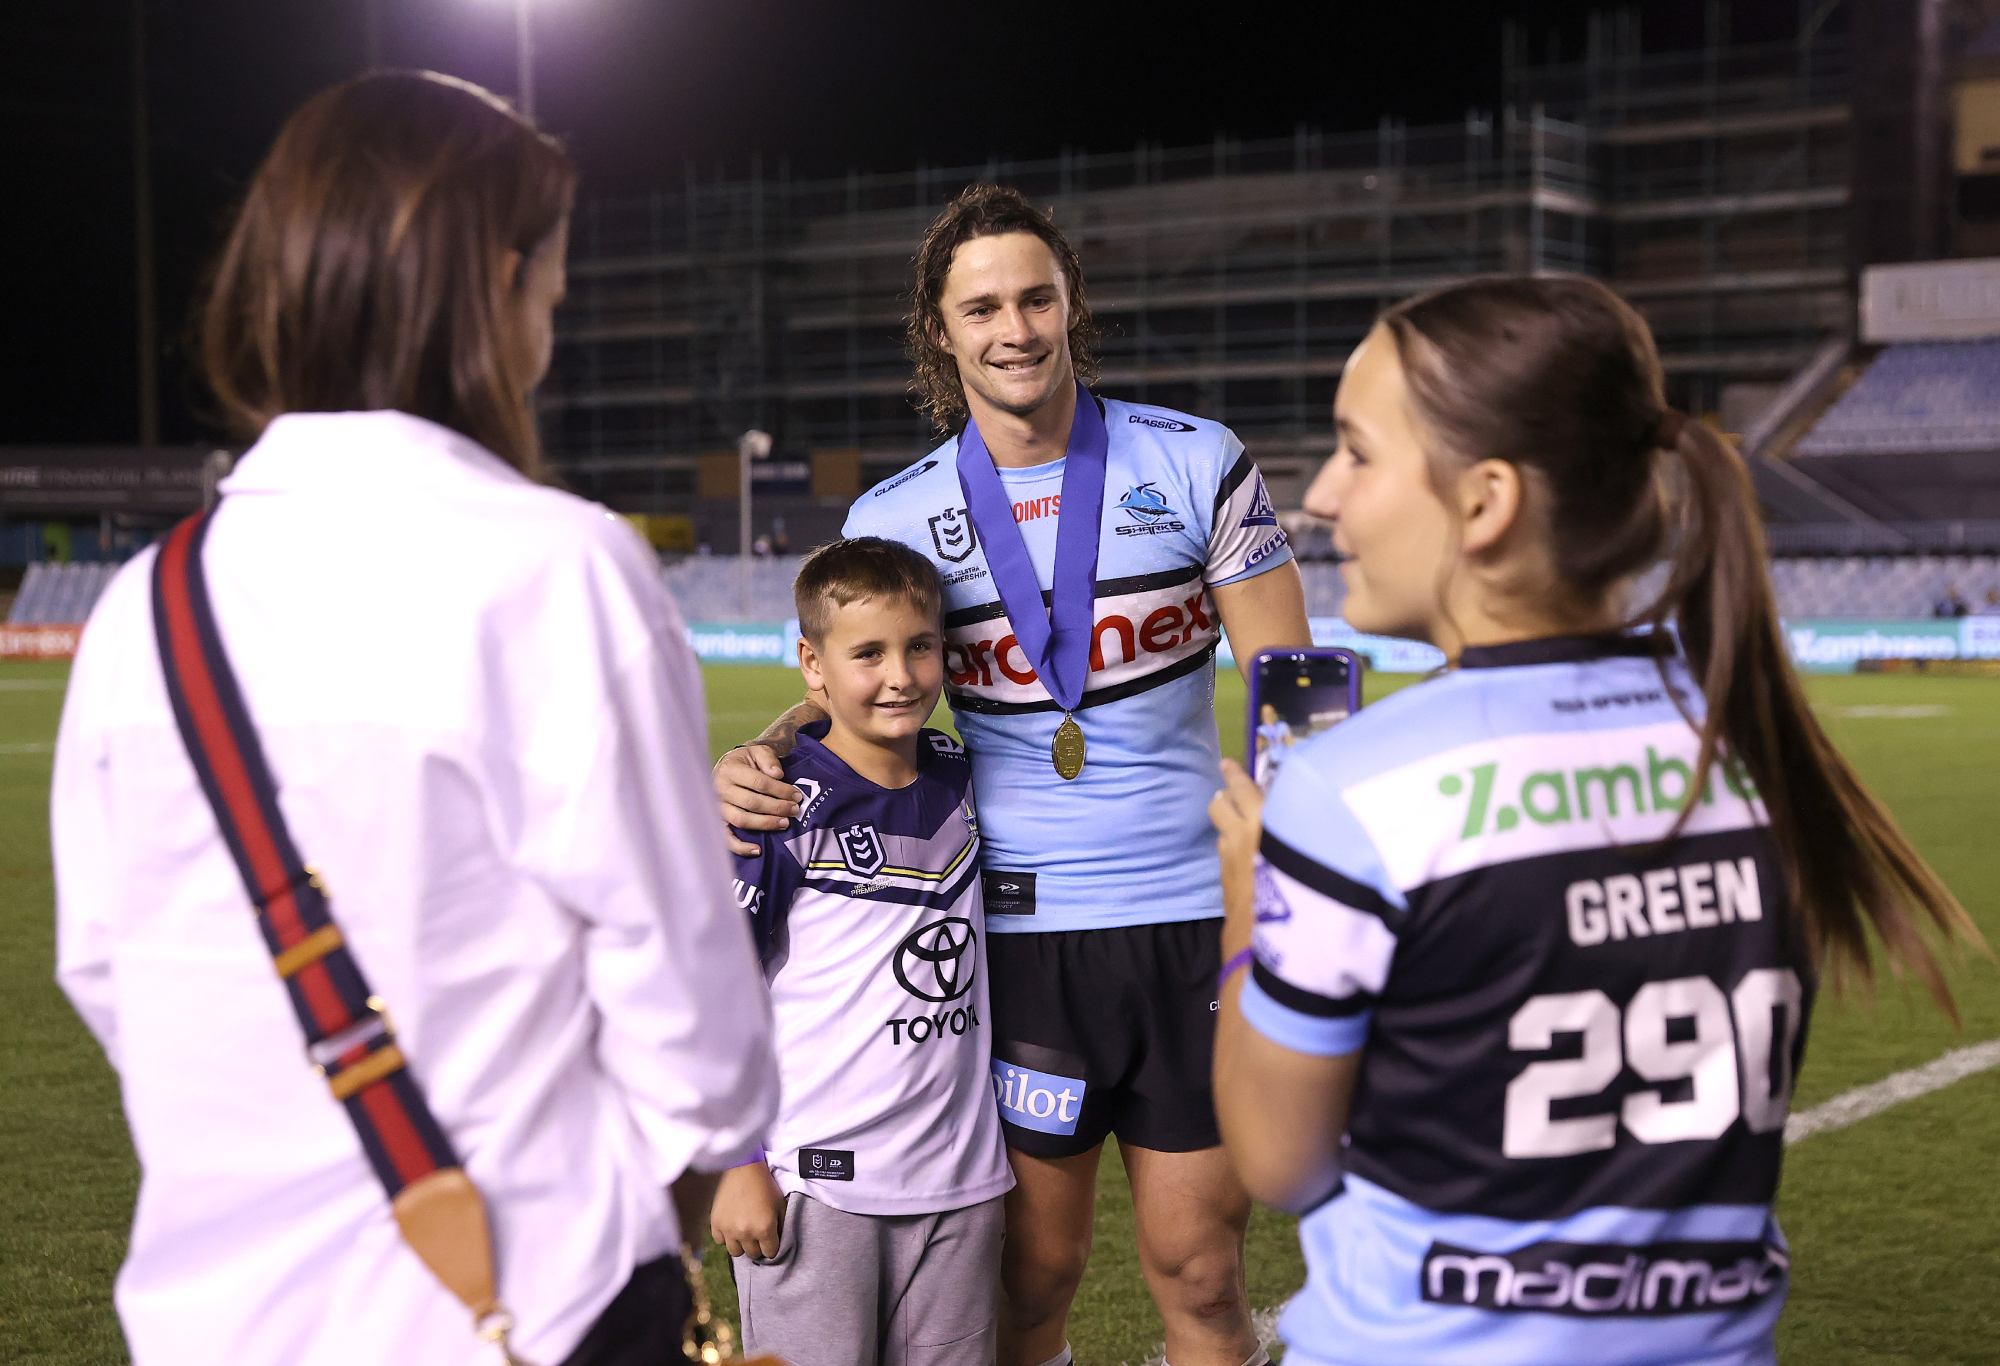 SYDNEY, AUSTRALIA - APRIL 27:  Nicholas Hynes of the Sharks poses with the children of Paul Green, Jed and Emerson after receiving the Paul Green Medal following the round nine NRL match between Cronulla Sharks and North Queensland Cowboys at PointsBet Stadium on April 27, 2023 in Sydney, Australia. (Photo by Cameron Spencer/Getty Images)